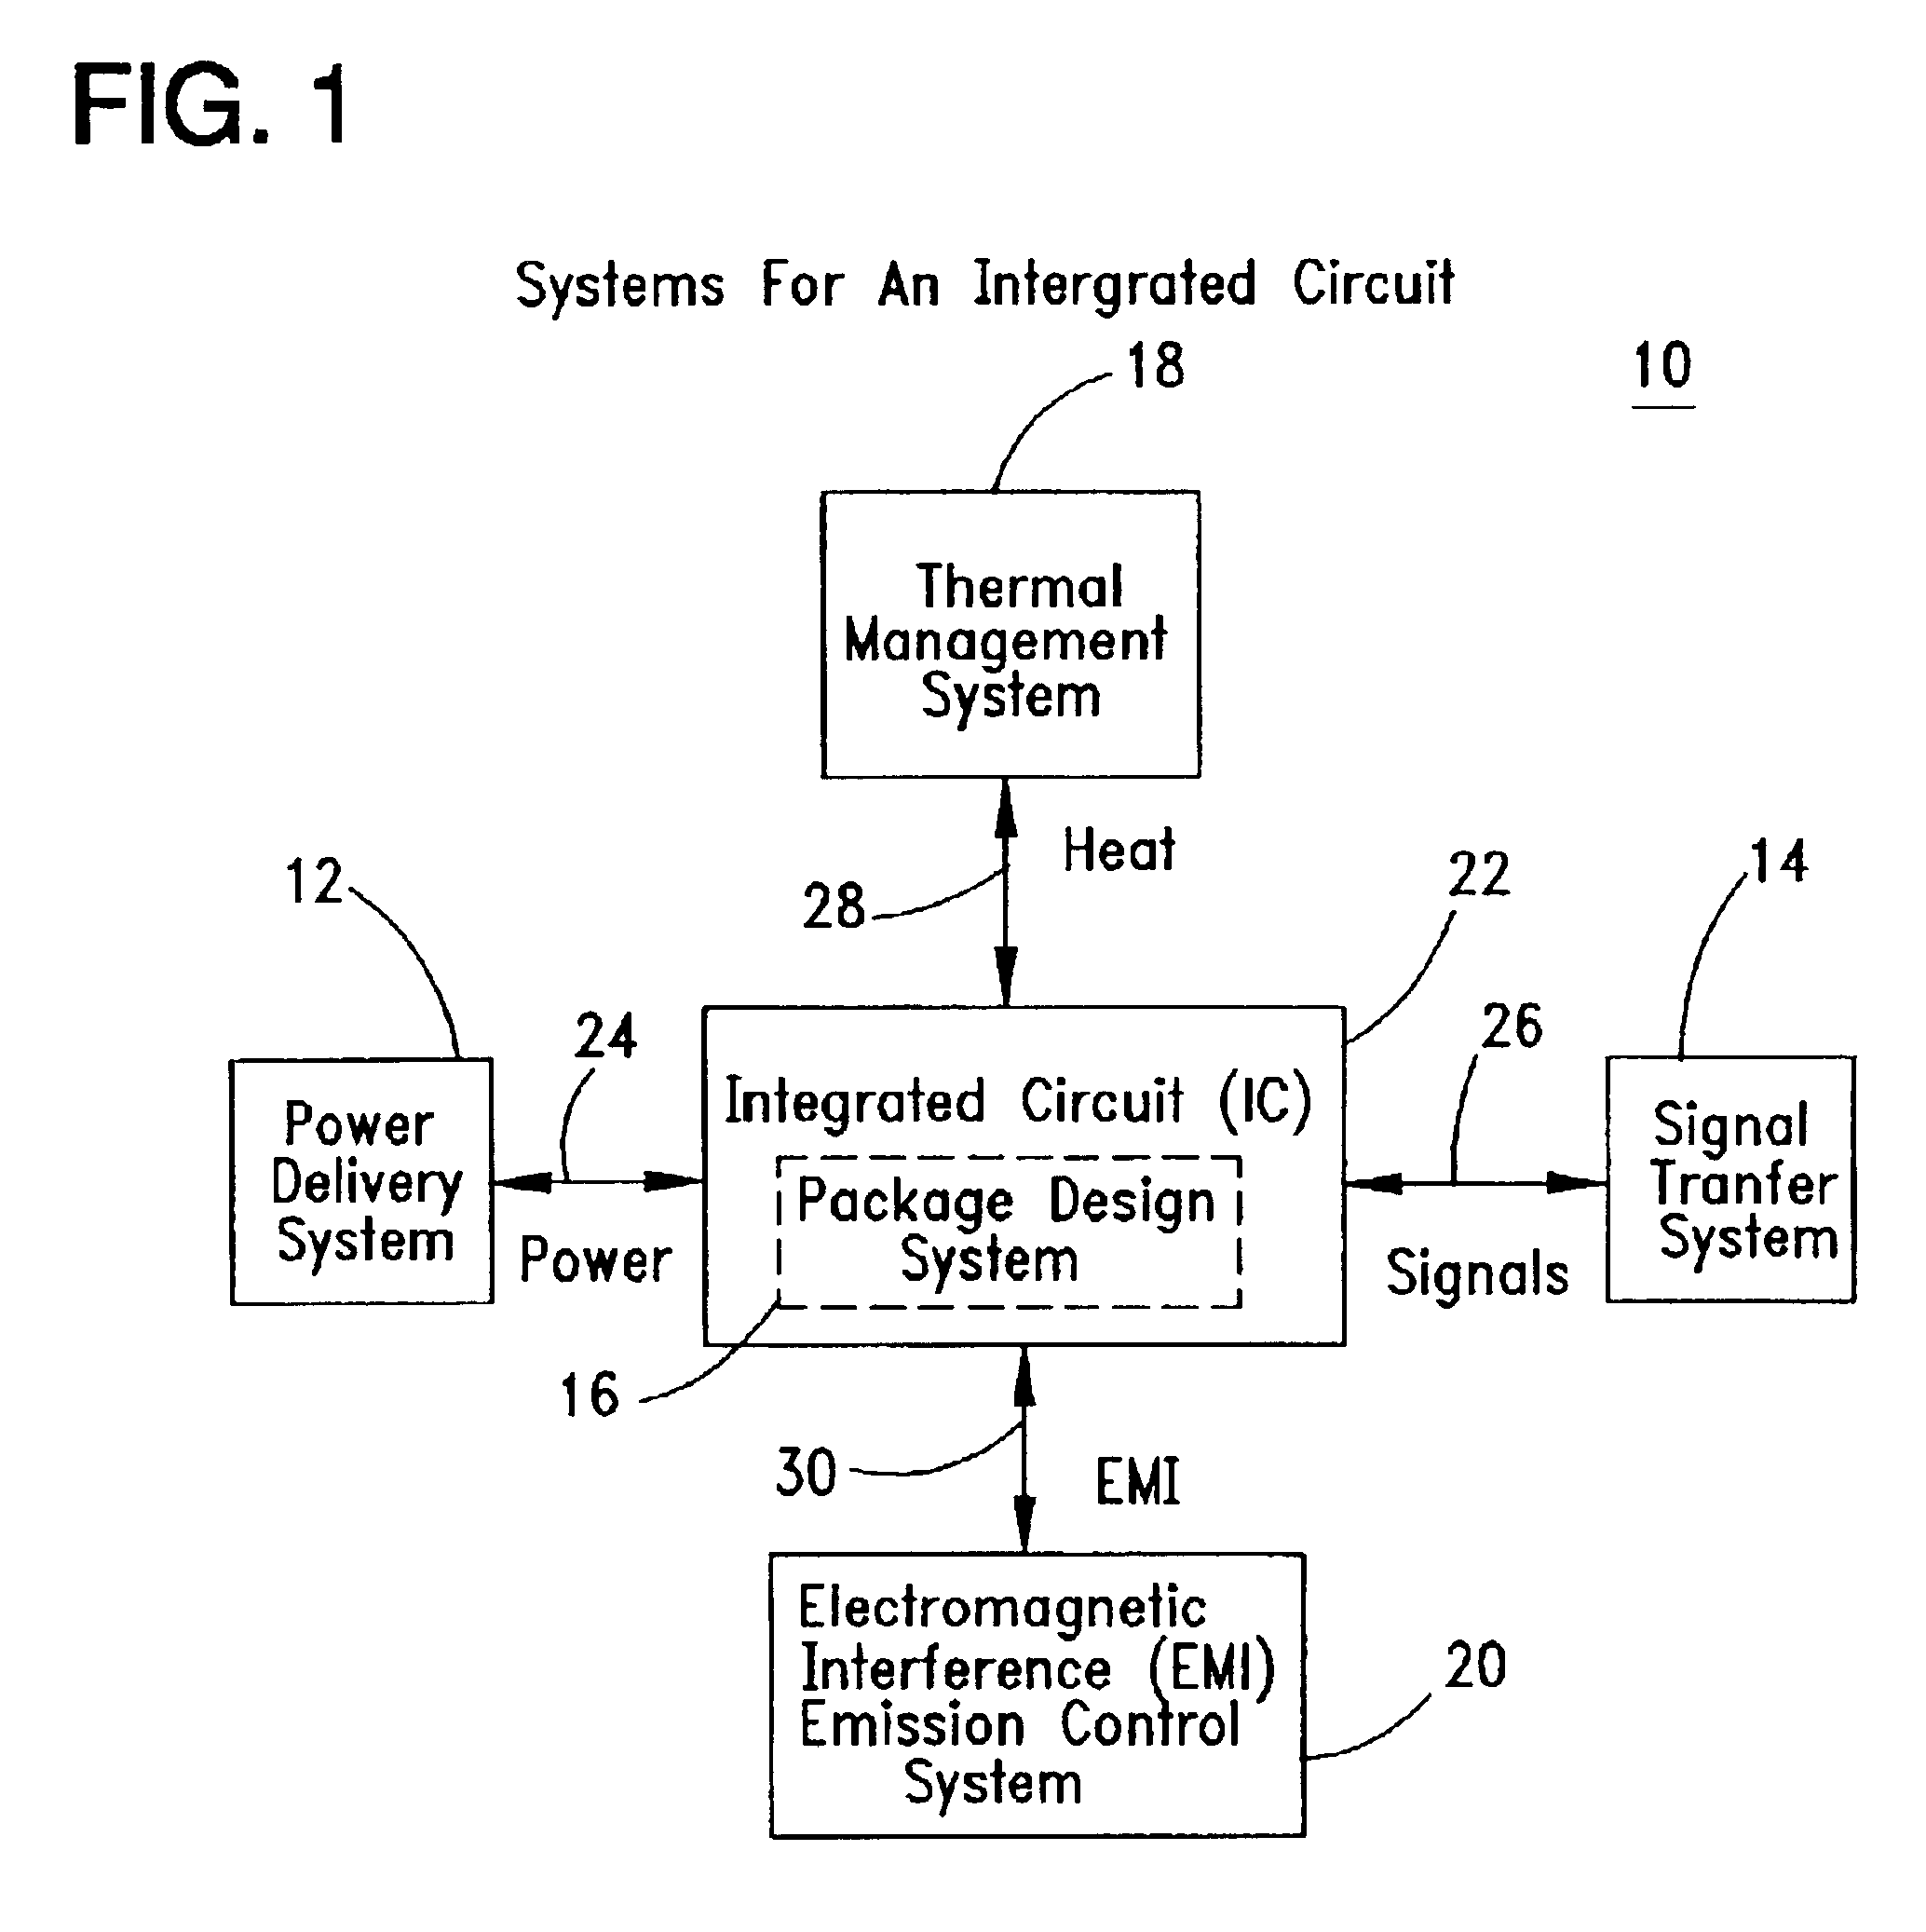 Thermal management of power delivery systems for integrated circuits